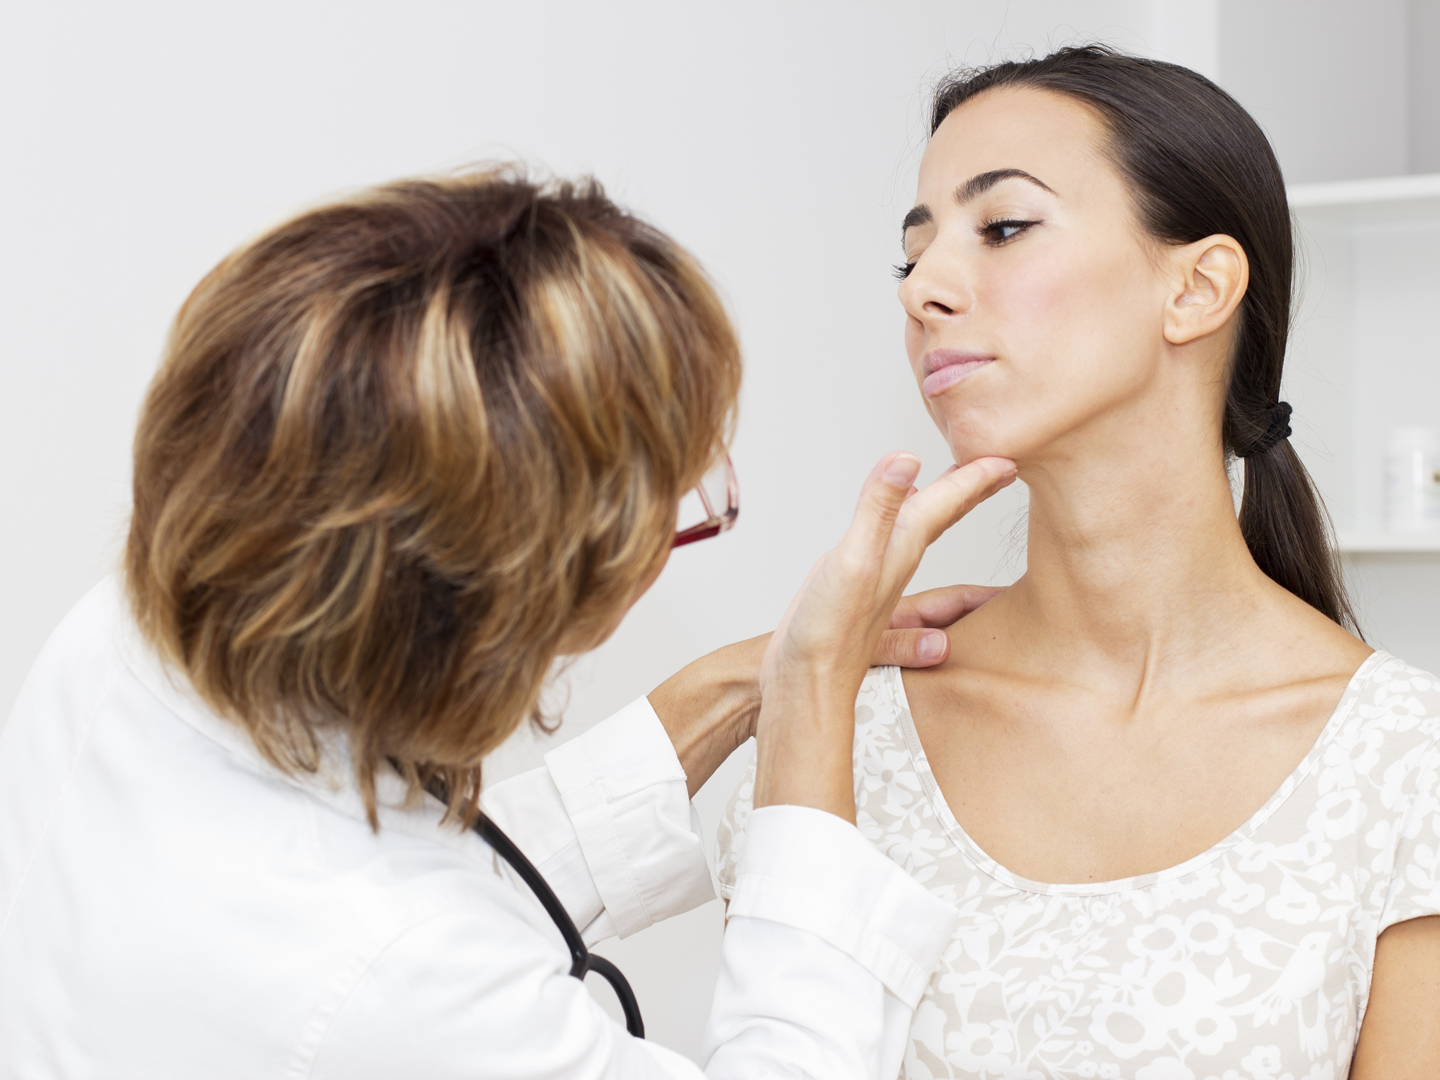 Worried About Your Thyroid? Watch For These 5 Signs